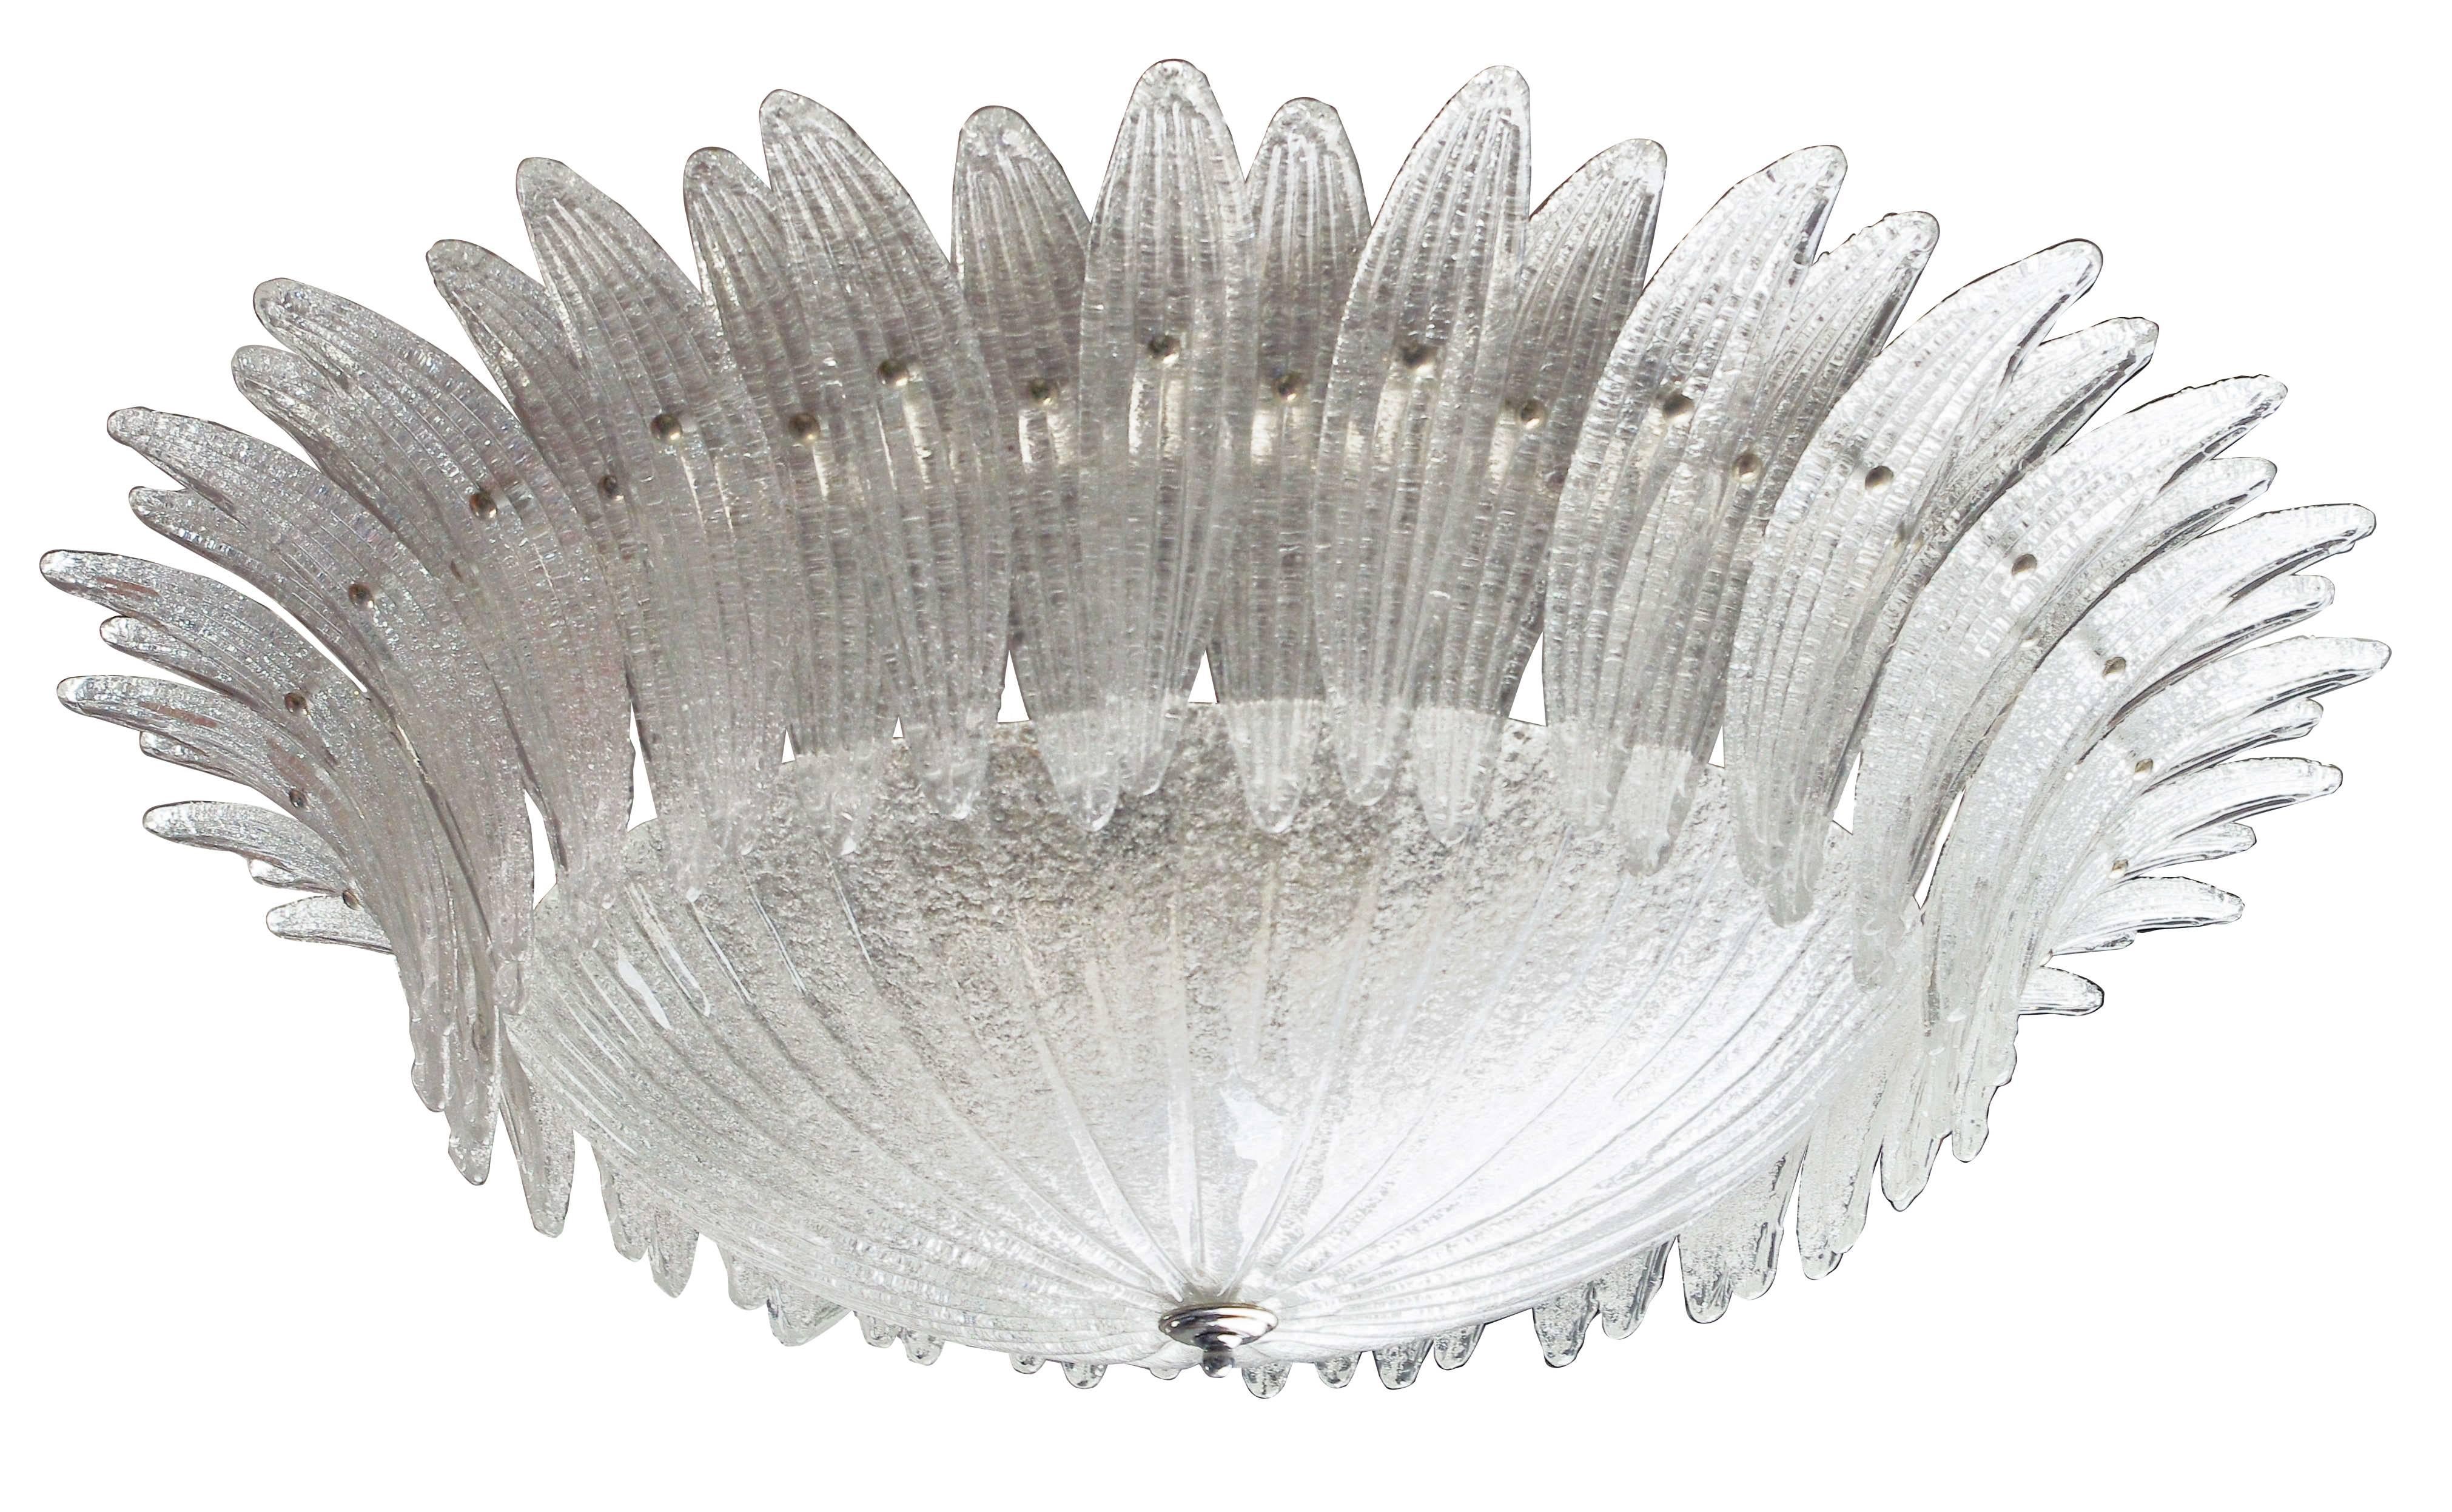 Italian Palmette flush mount chandelier shown in clear Murano glass leaves with granular texture using Graniglia technique, mounted on chrome metal finish frame / Made in Italy
9 lights / E26 or E27 type / max 60W each
Diameter: 40 inches / Height: